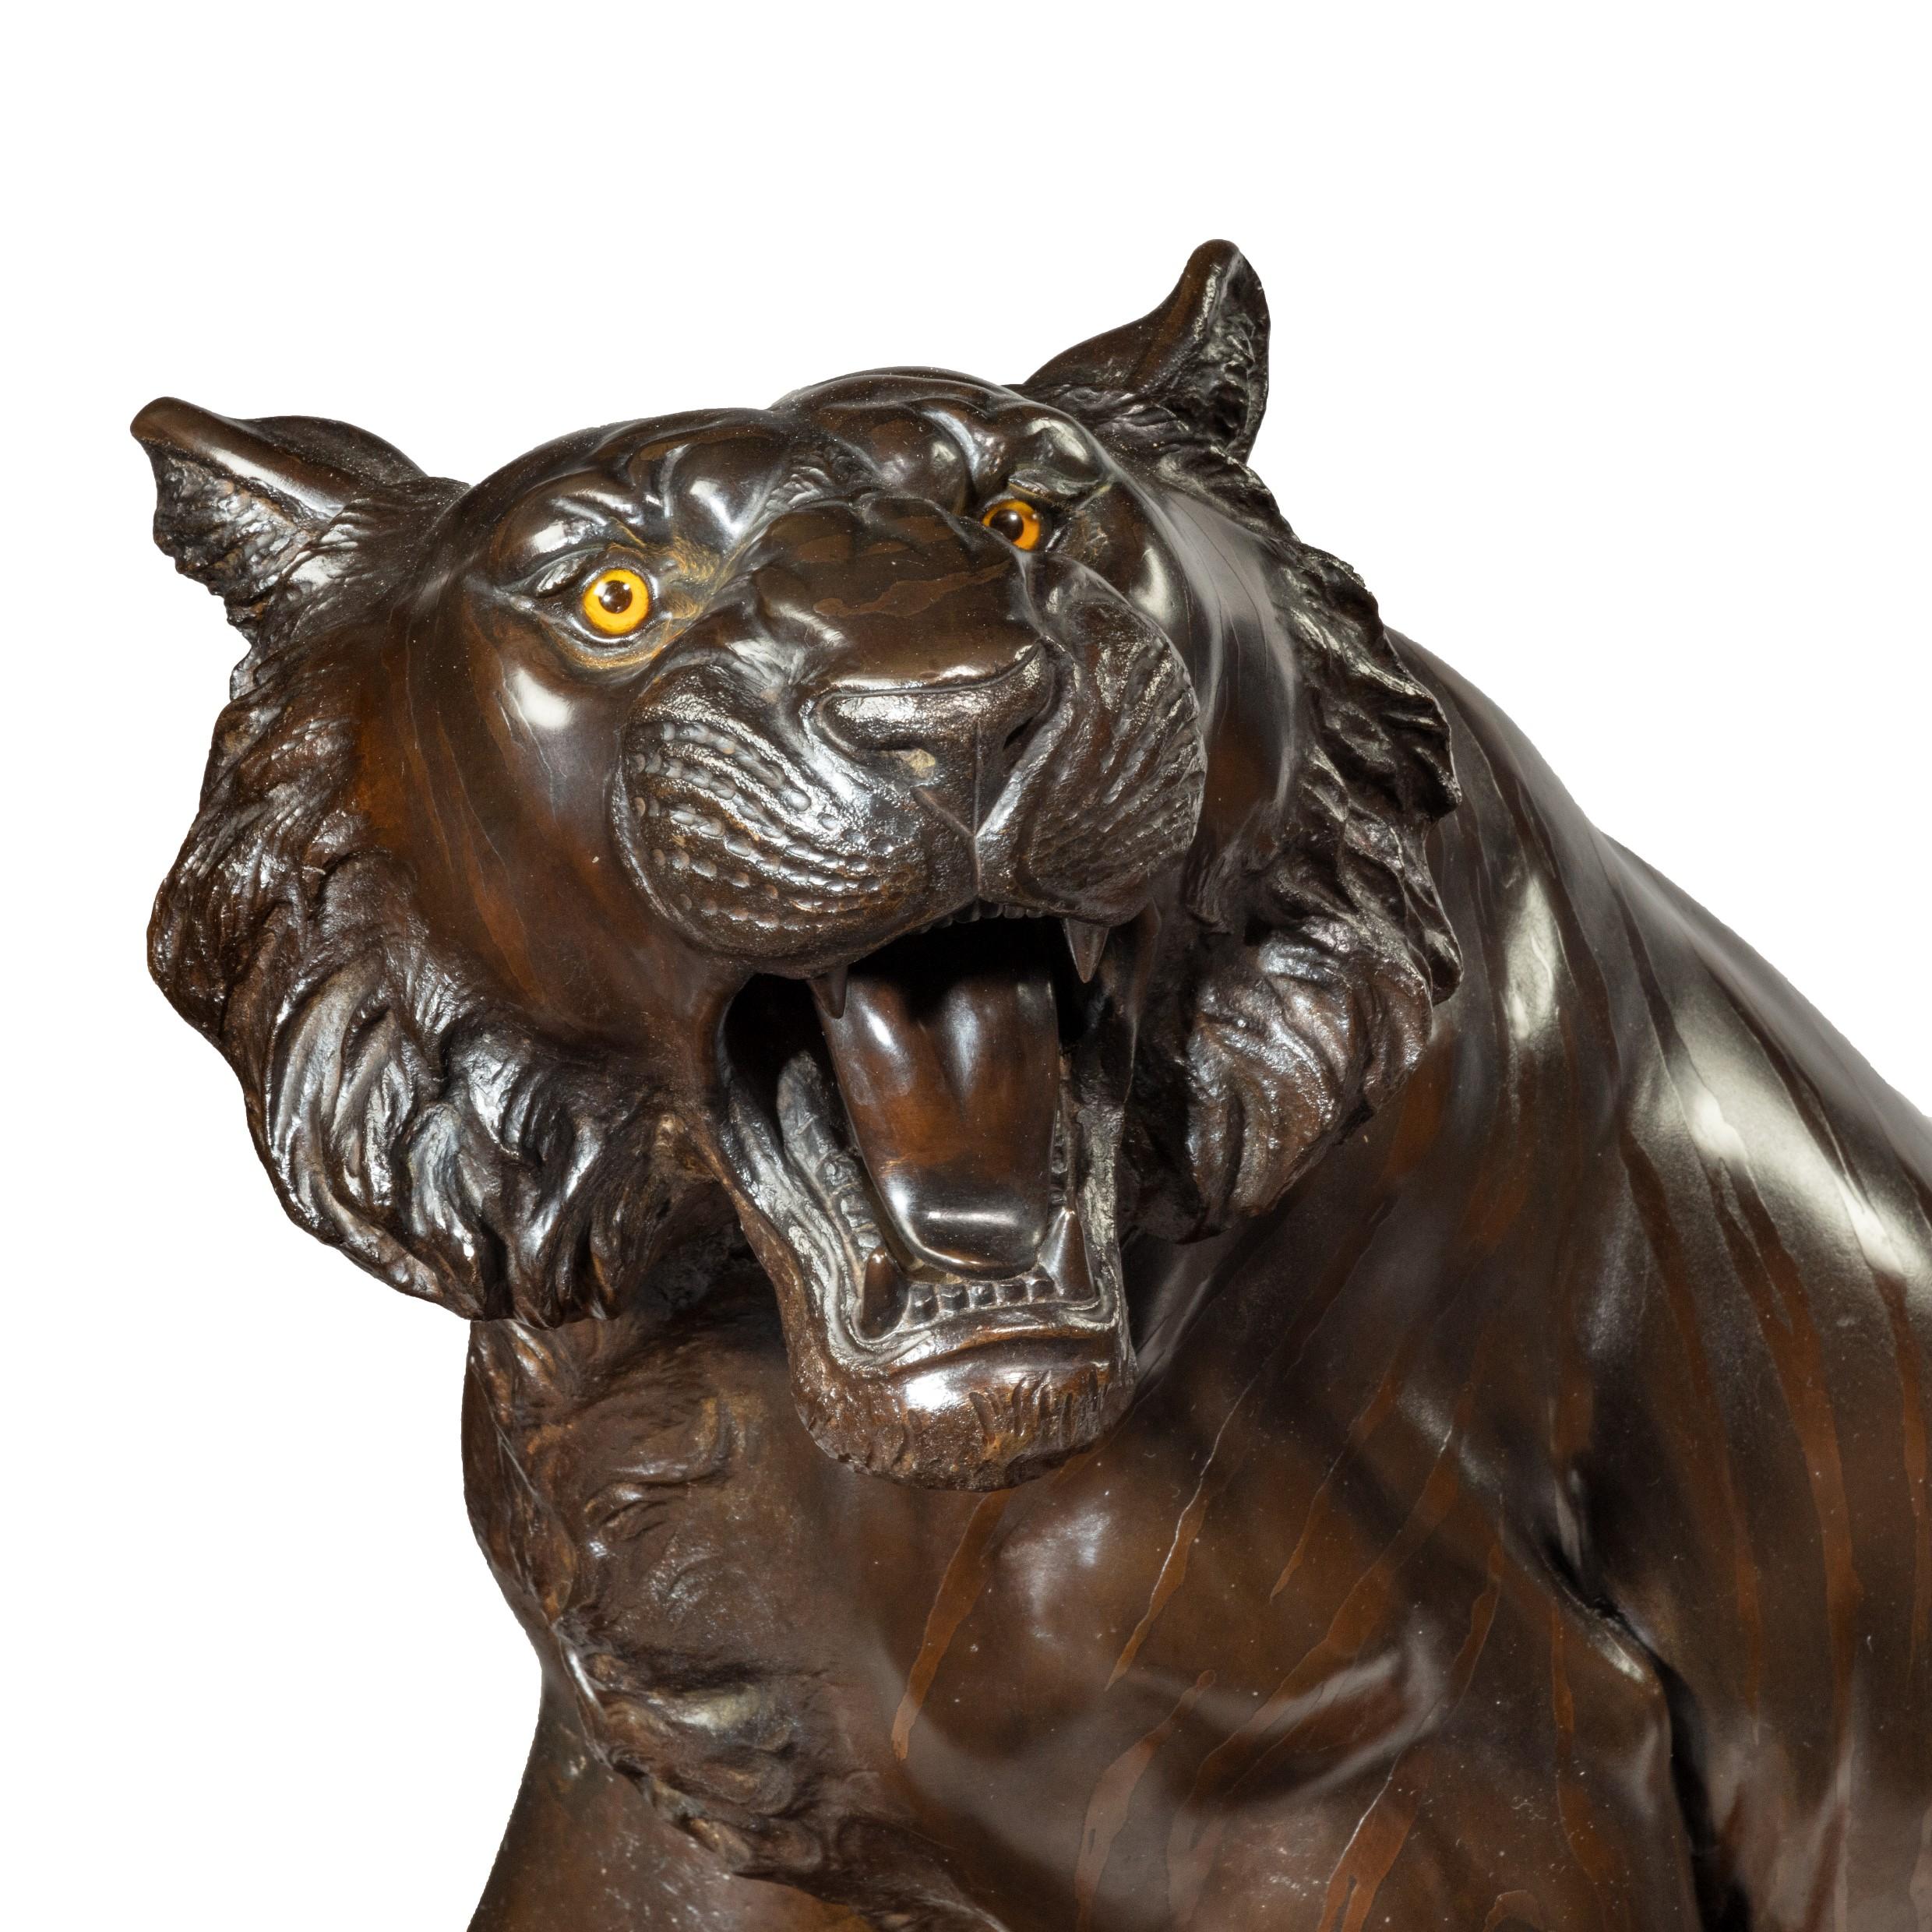 Large Meiji period bronze tiger by Genryusai Seiya, striding forward with teeth bared, the bronze patinated to imitate tiger stripes, with inlaid glass eyes, set on a gnarled rootwood base. Impressed seal mark Dai-Nihon Genryusai Seiya zo [Made by